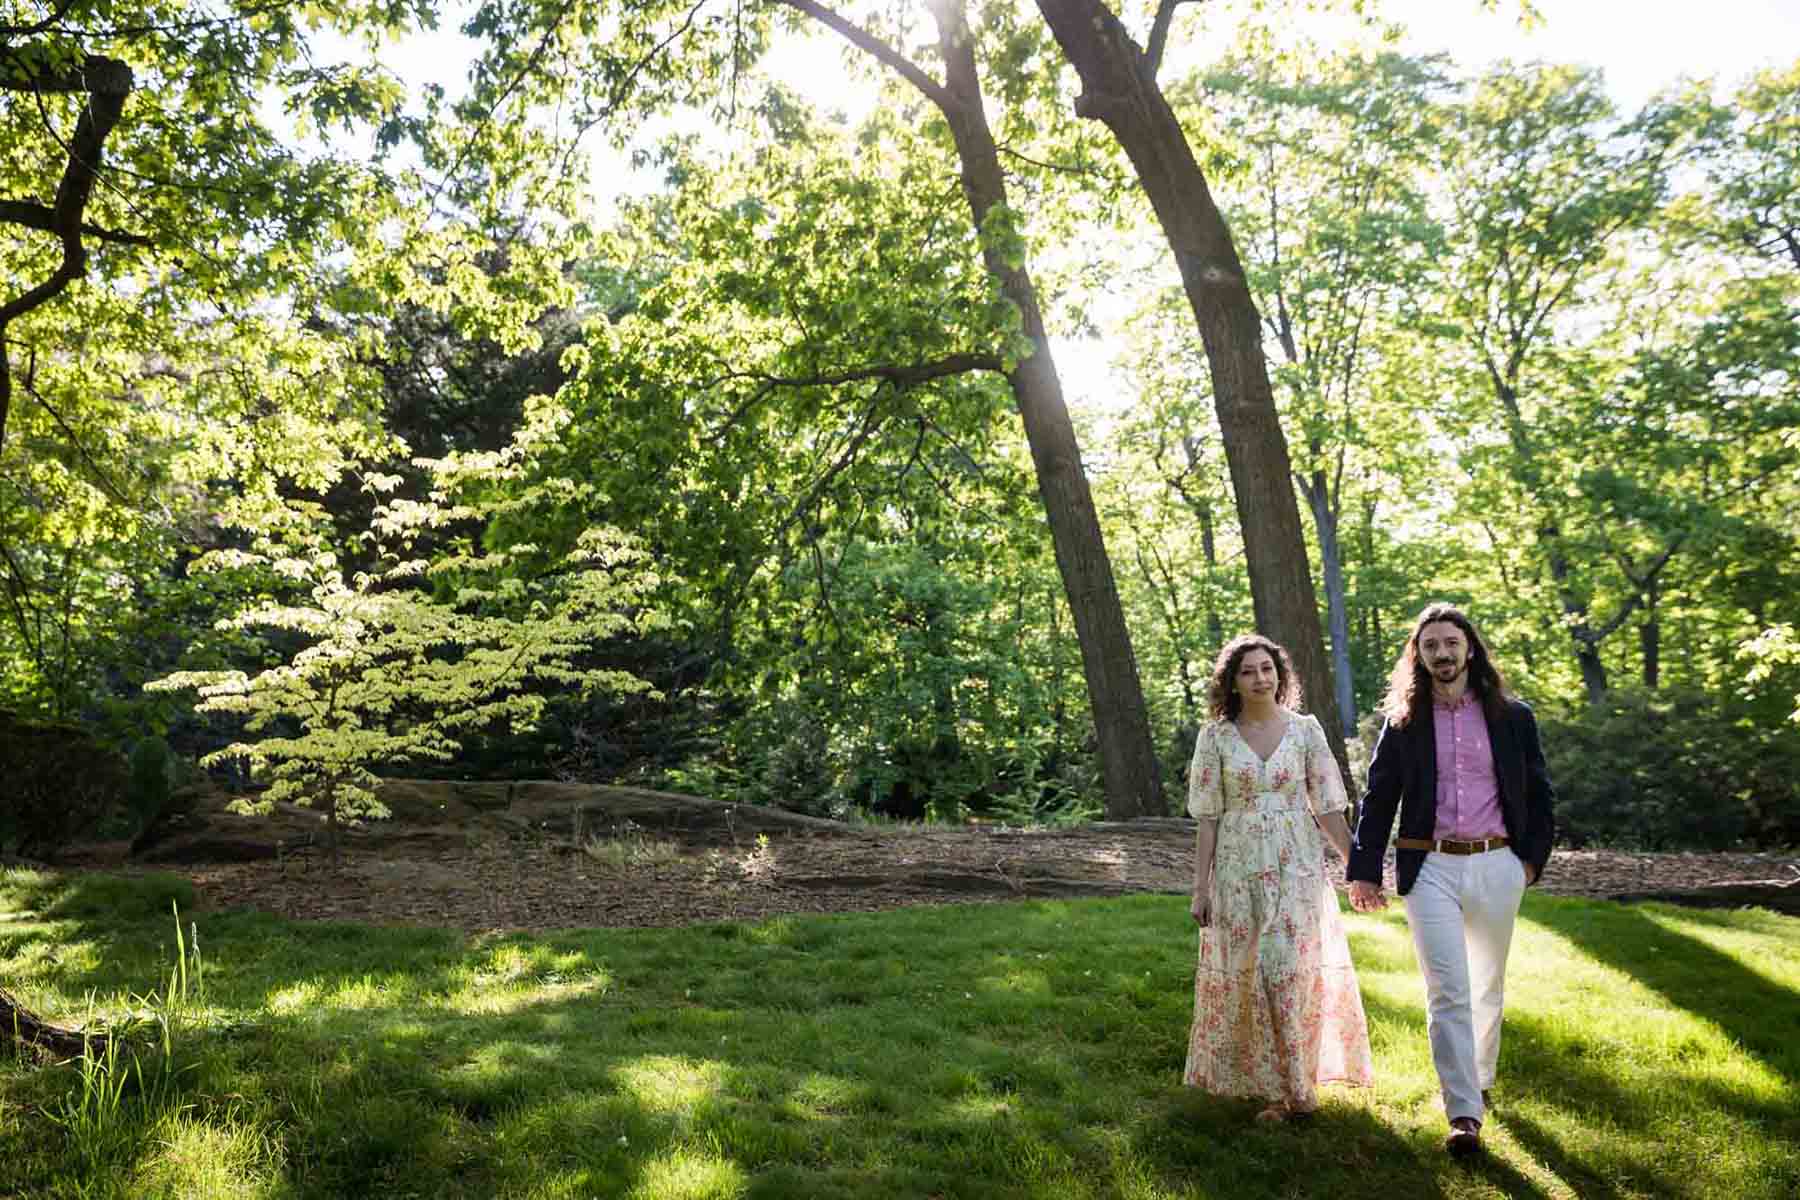 Couple walking in Conifer Collection in New York Botanical Garden